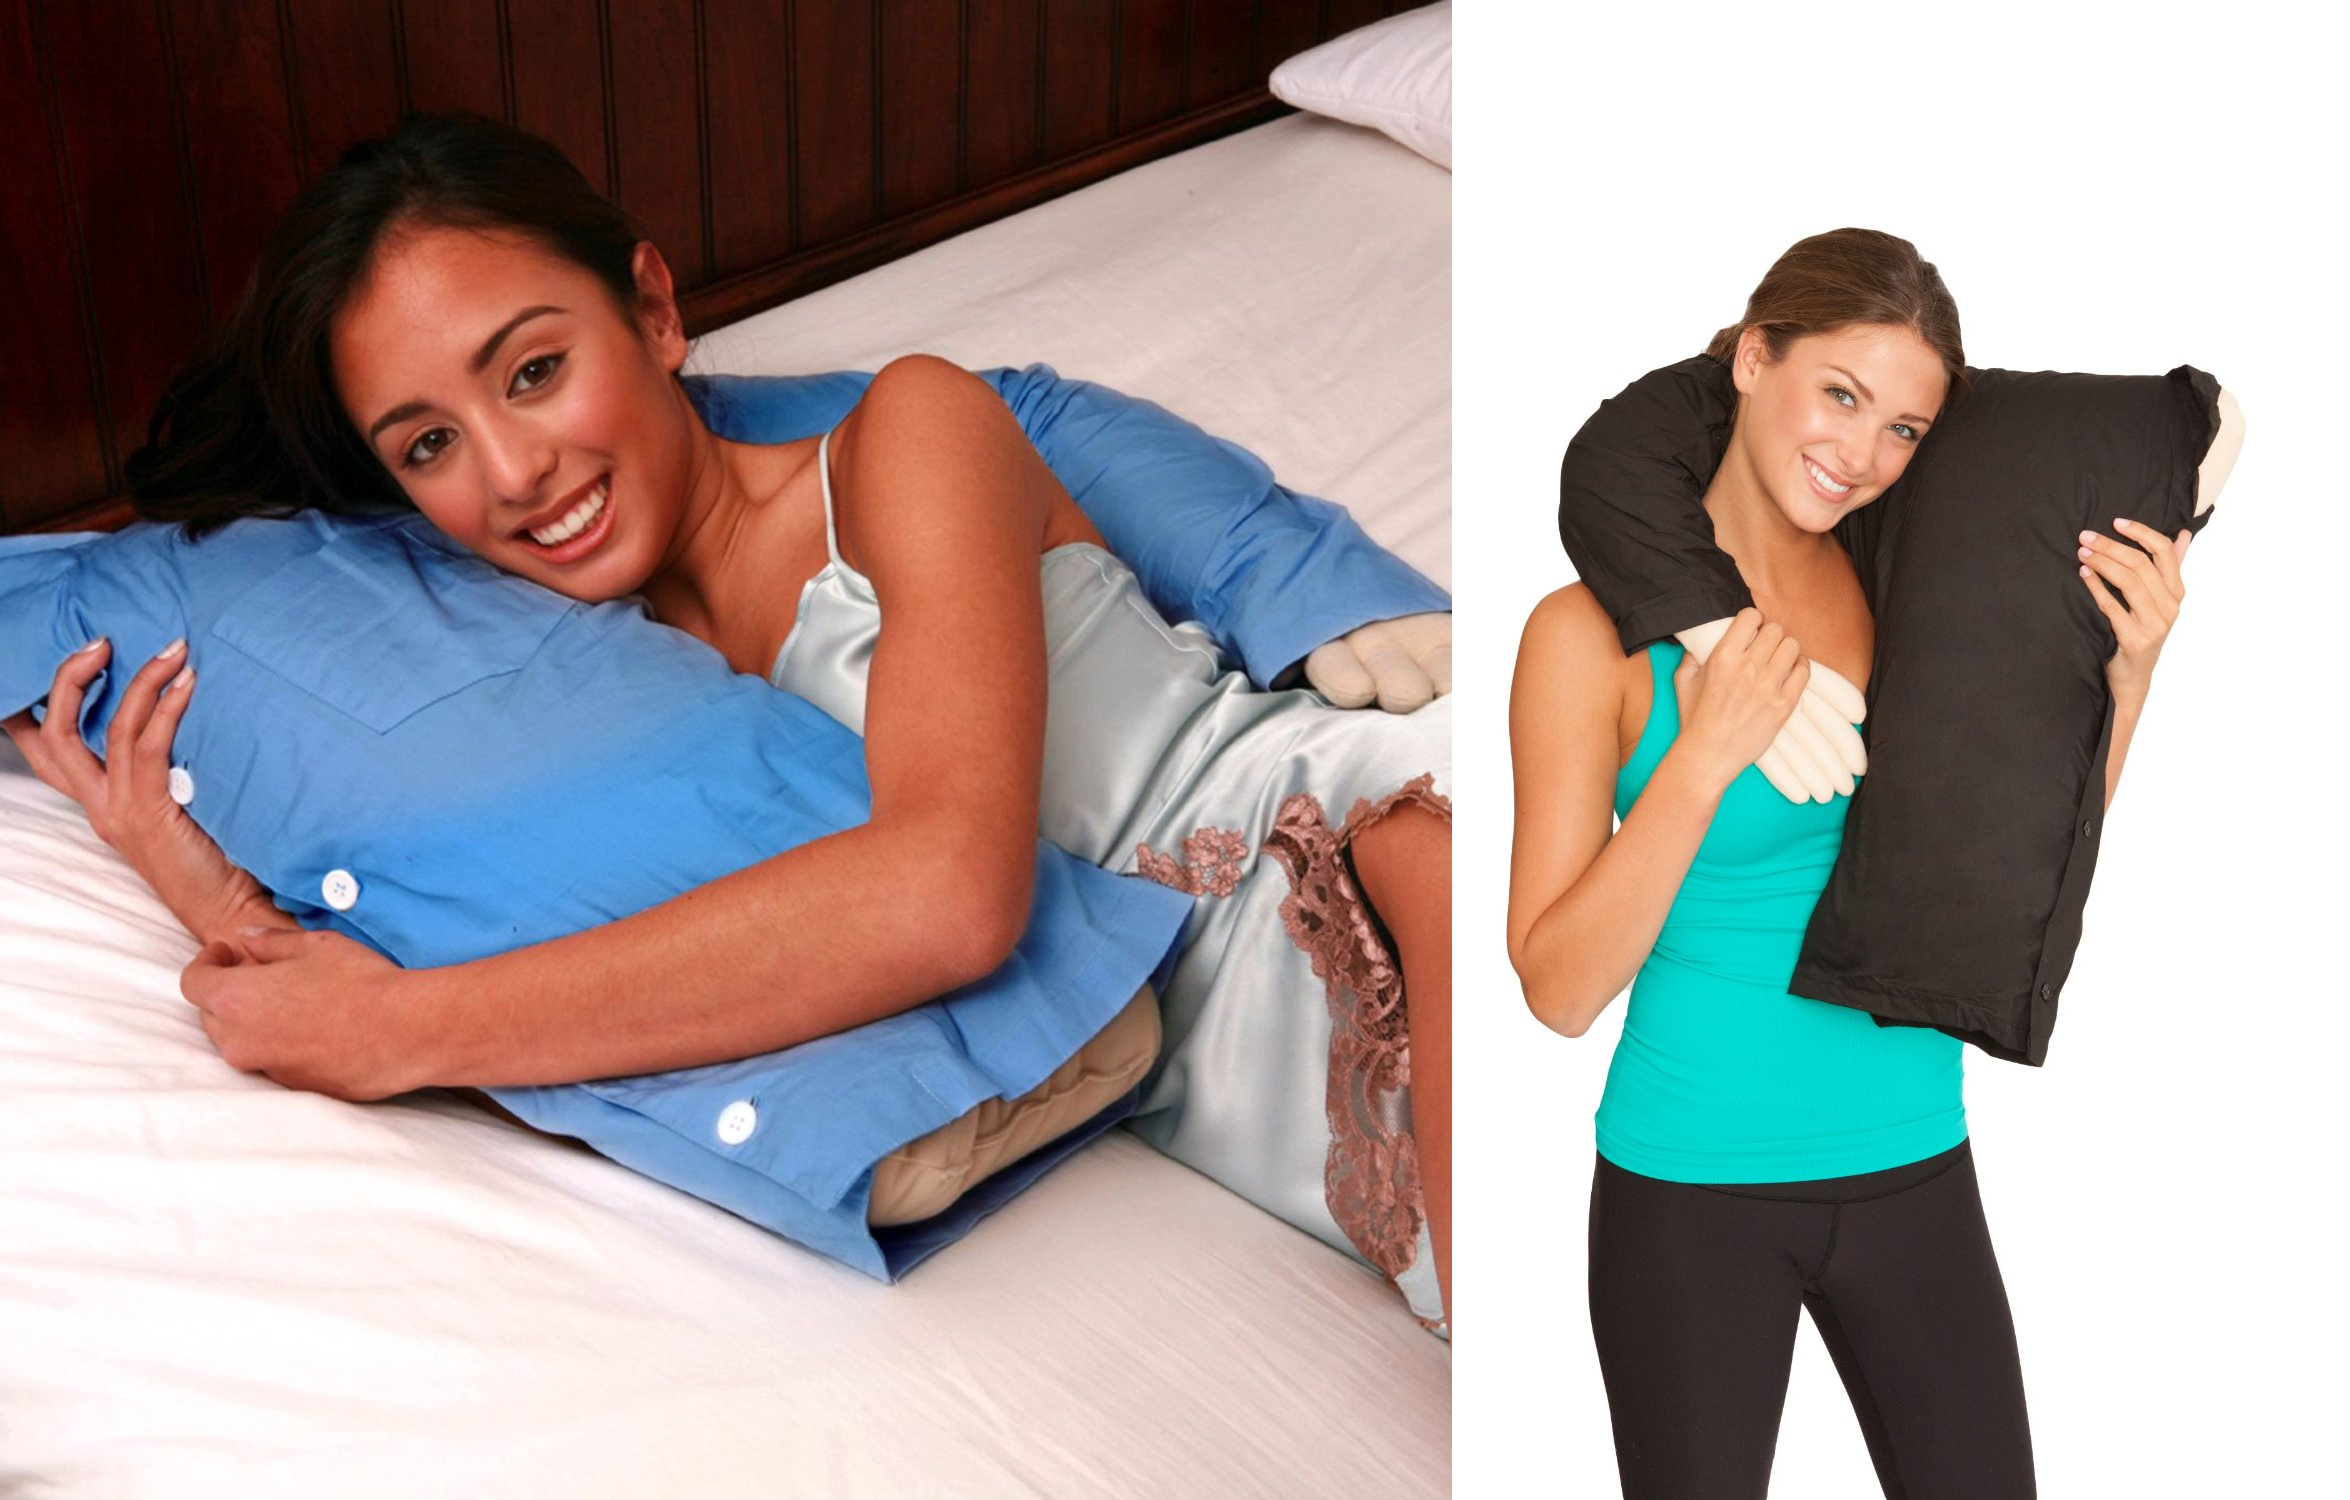 silly sleeping napping Boyfriend Pillow gadgets